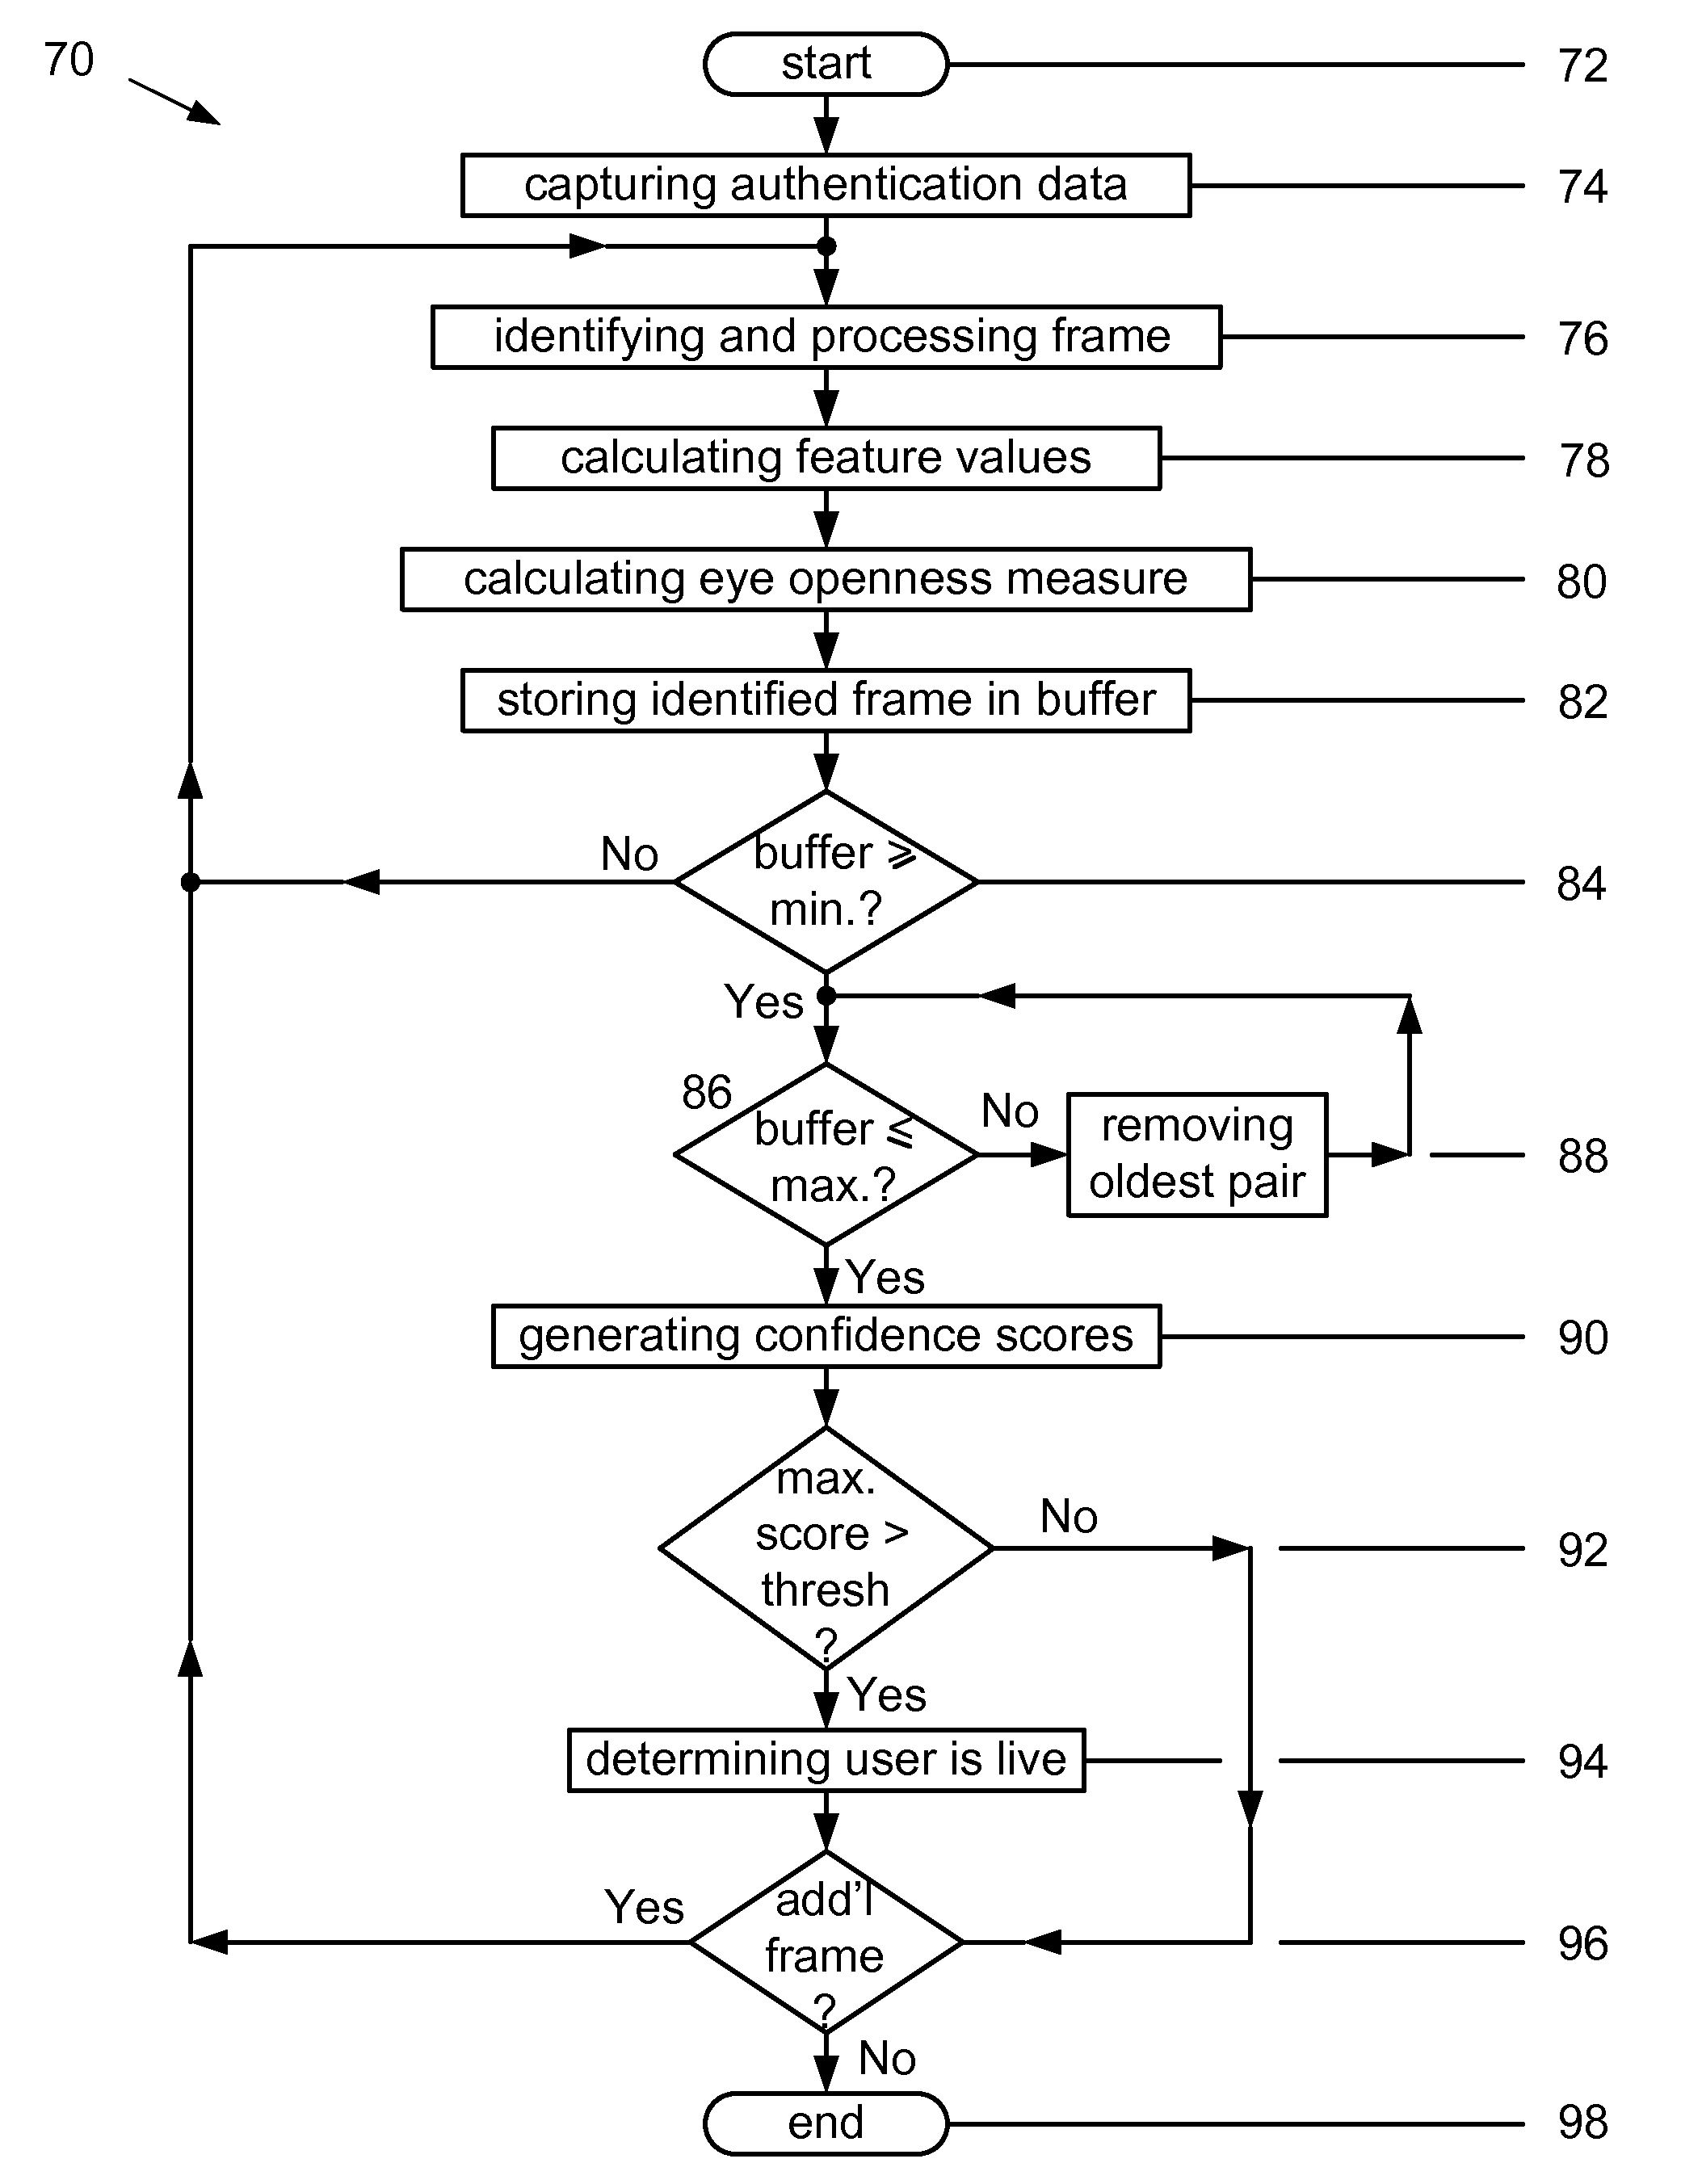 Methods and systems for determining user liveness